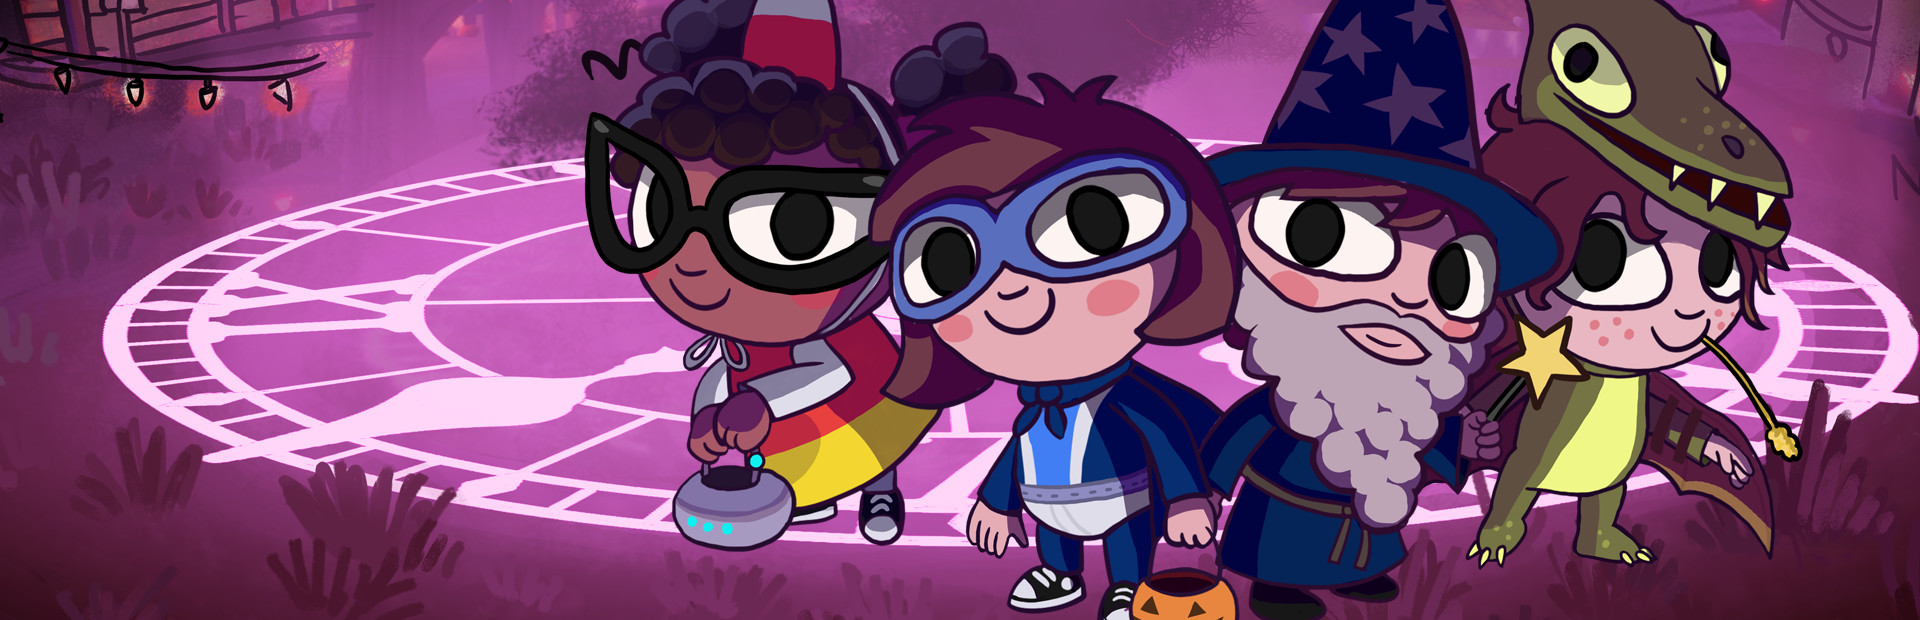 Costume Quest 2 cover image